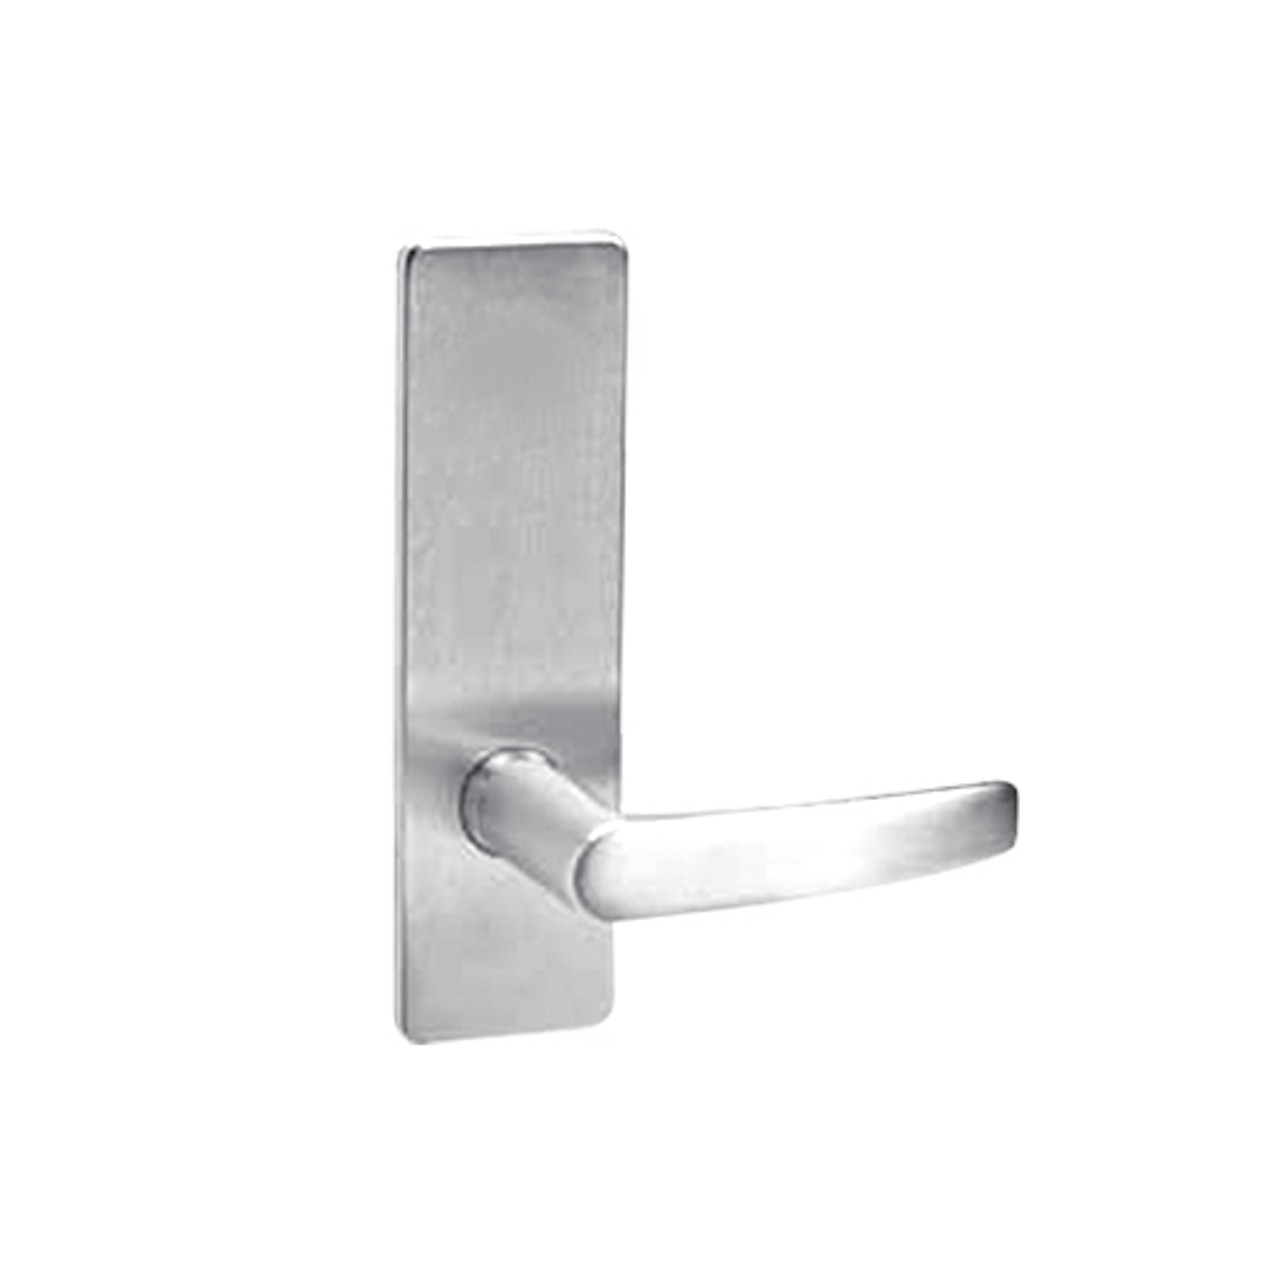 ML2050-ASR-629 Corbin Russwin ML2000 Series Mortise Half Dummy Locksets with Armstrong Lever in Bright Stainless Steel